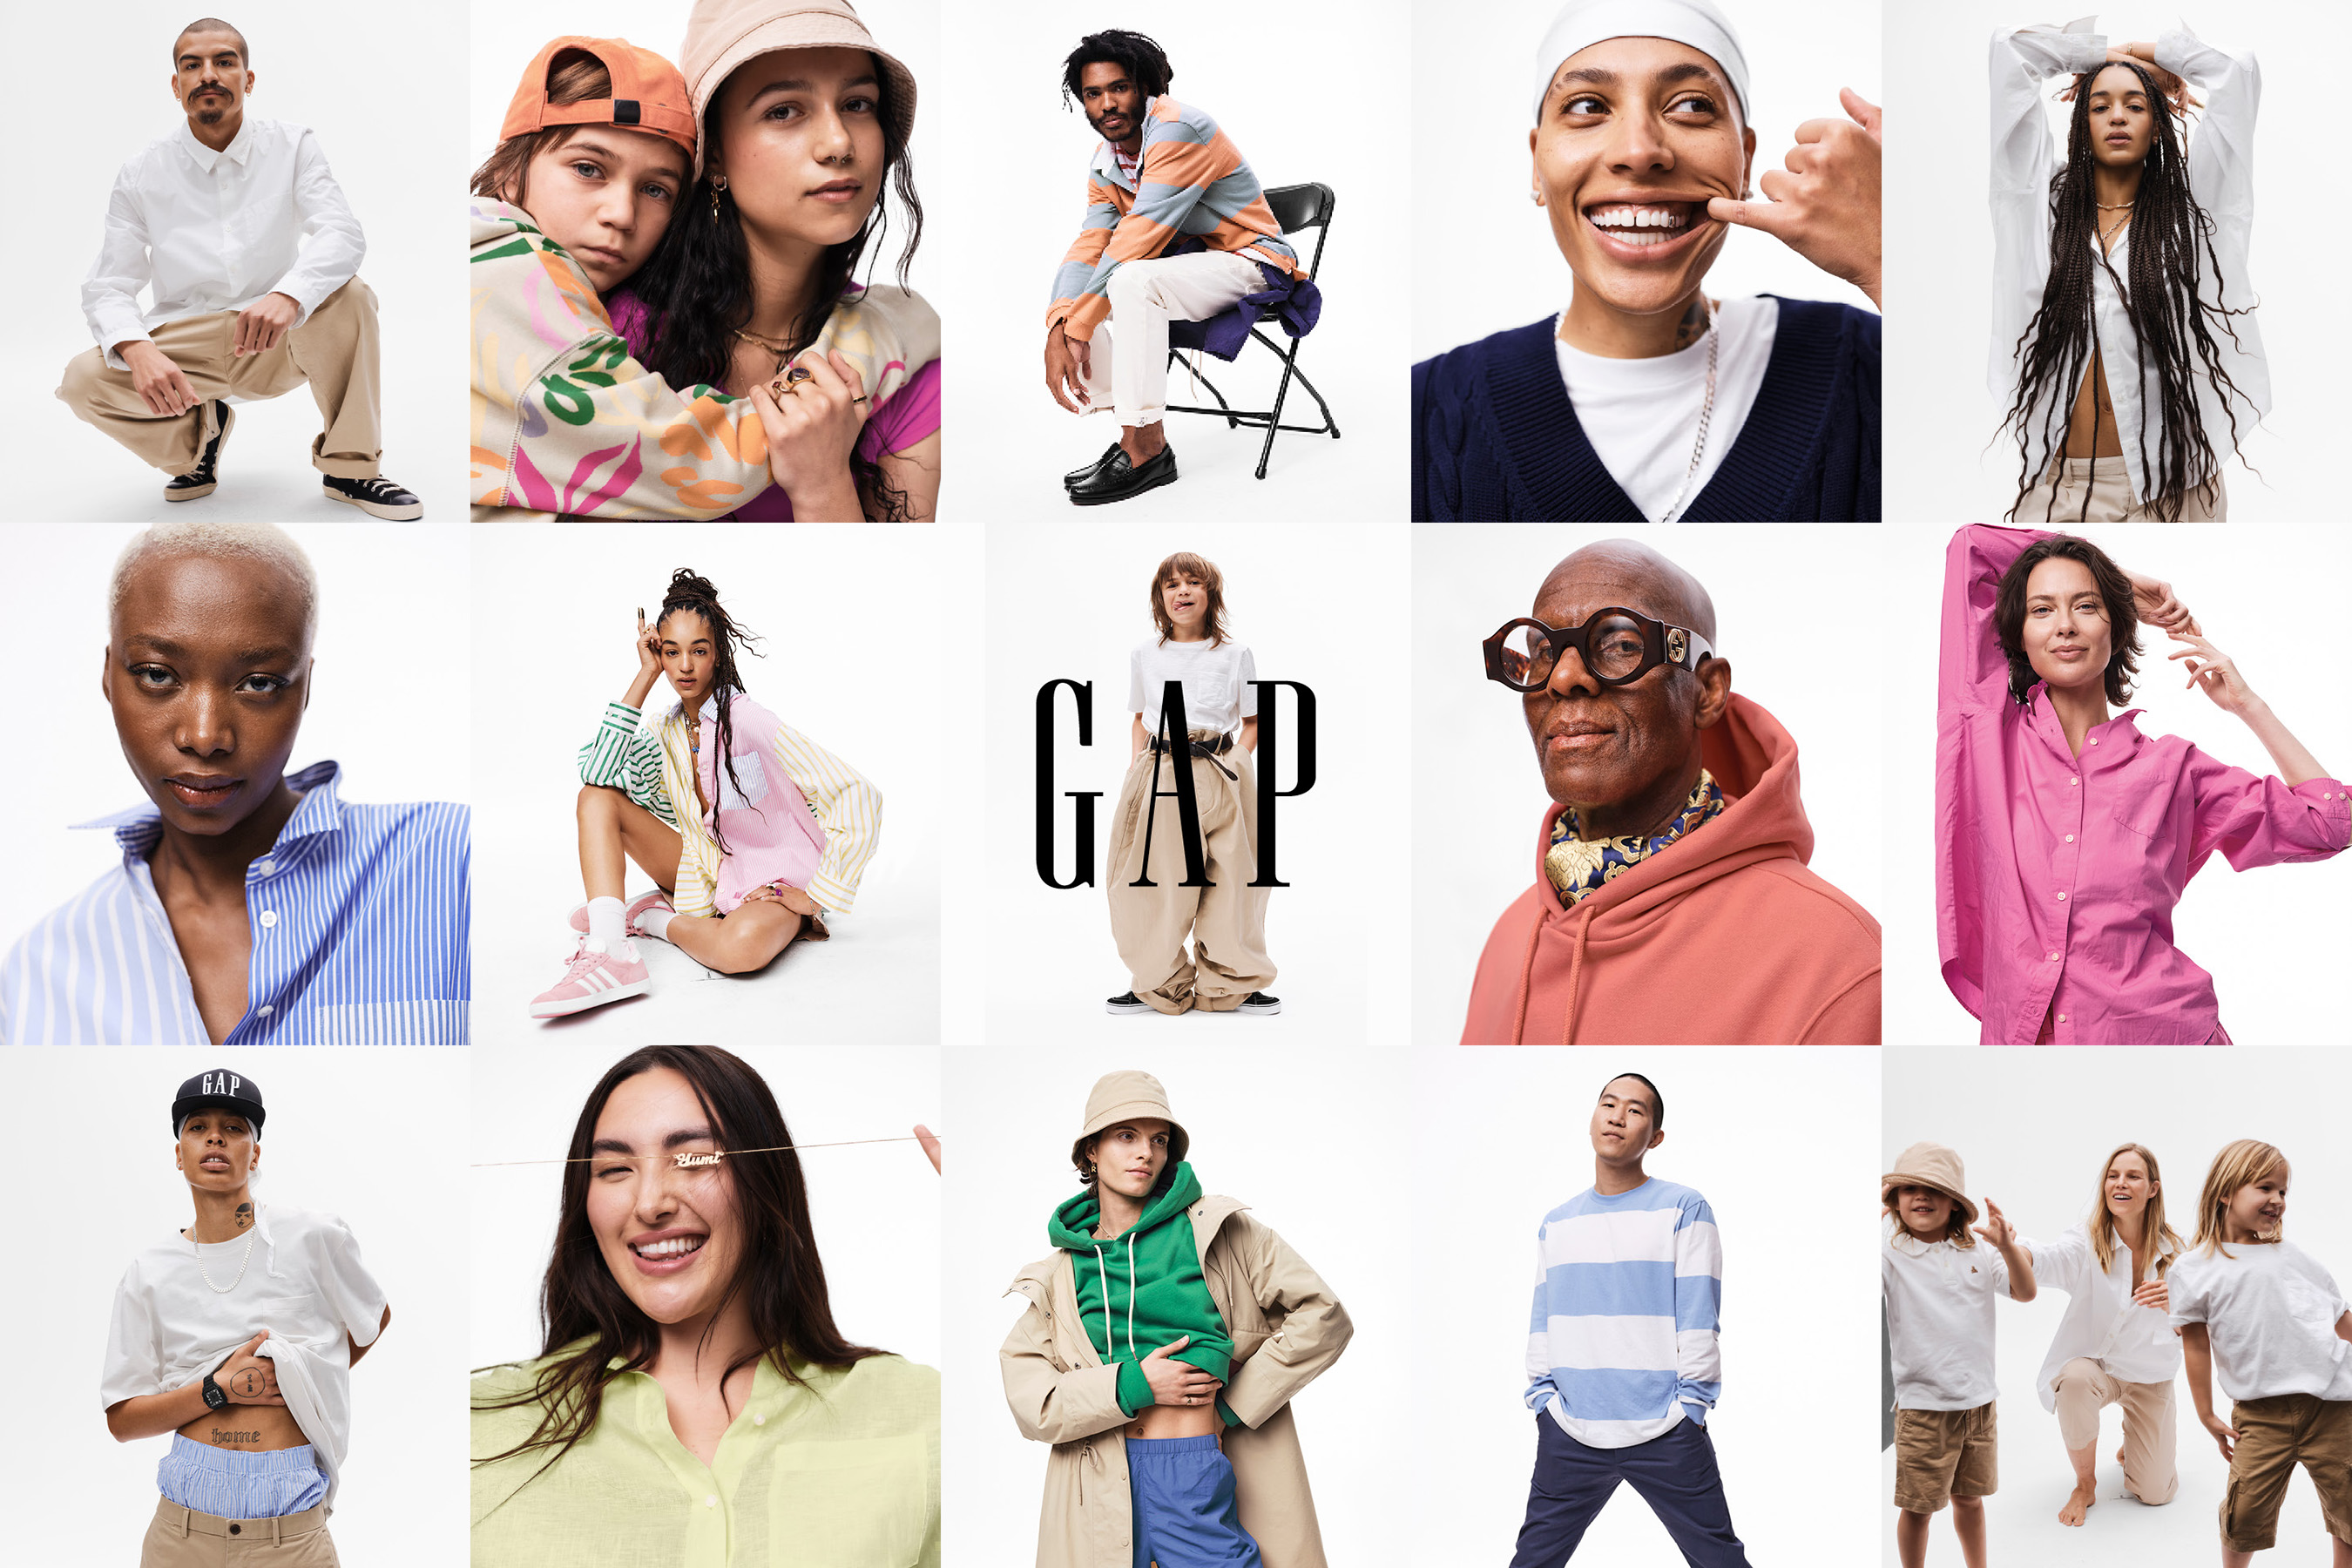 Gap’s Spring Campaign Champions Individuality and the Freedom to Be Yourself